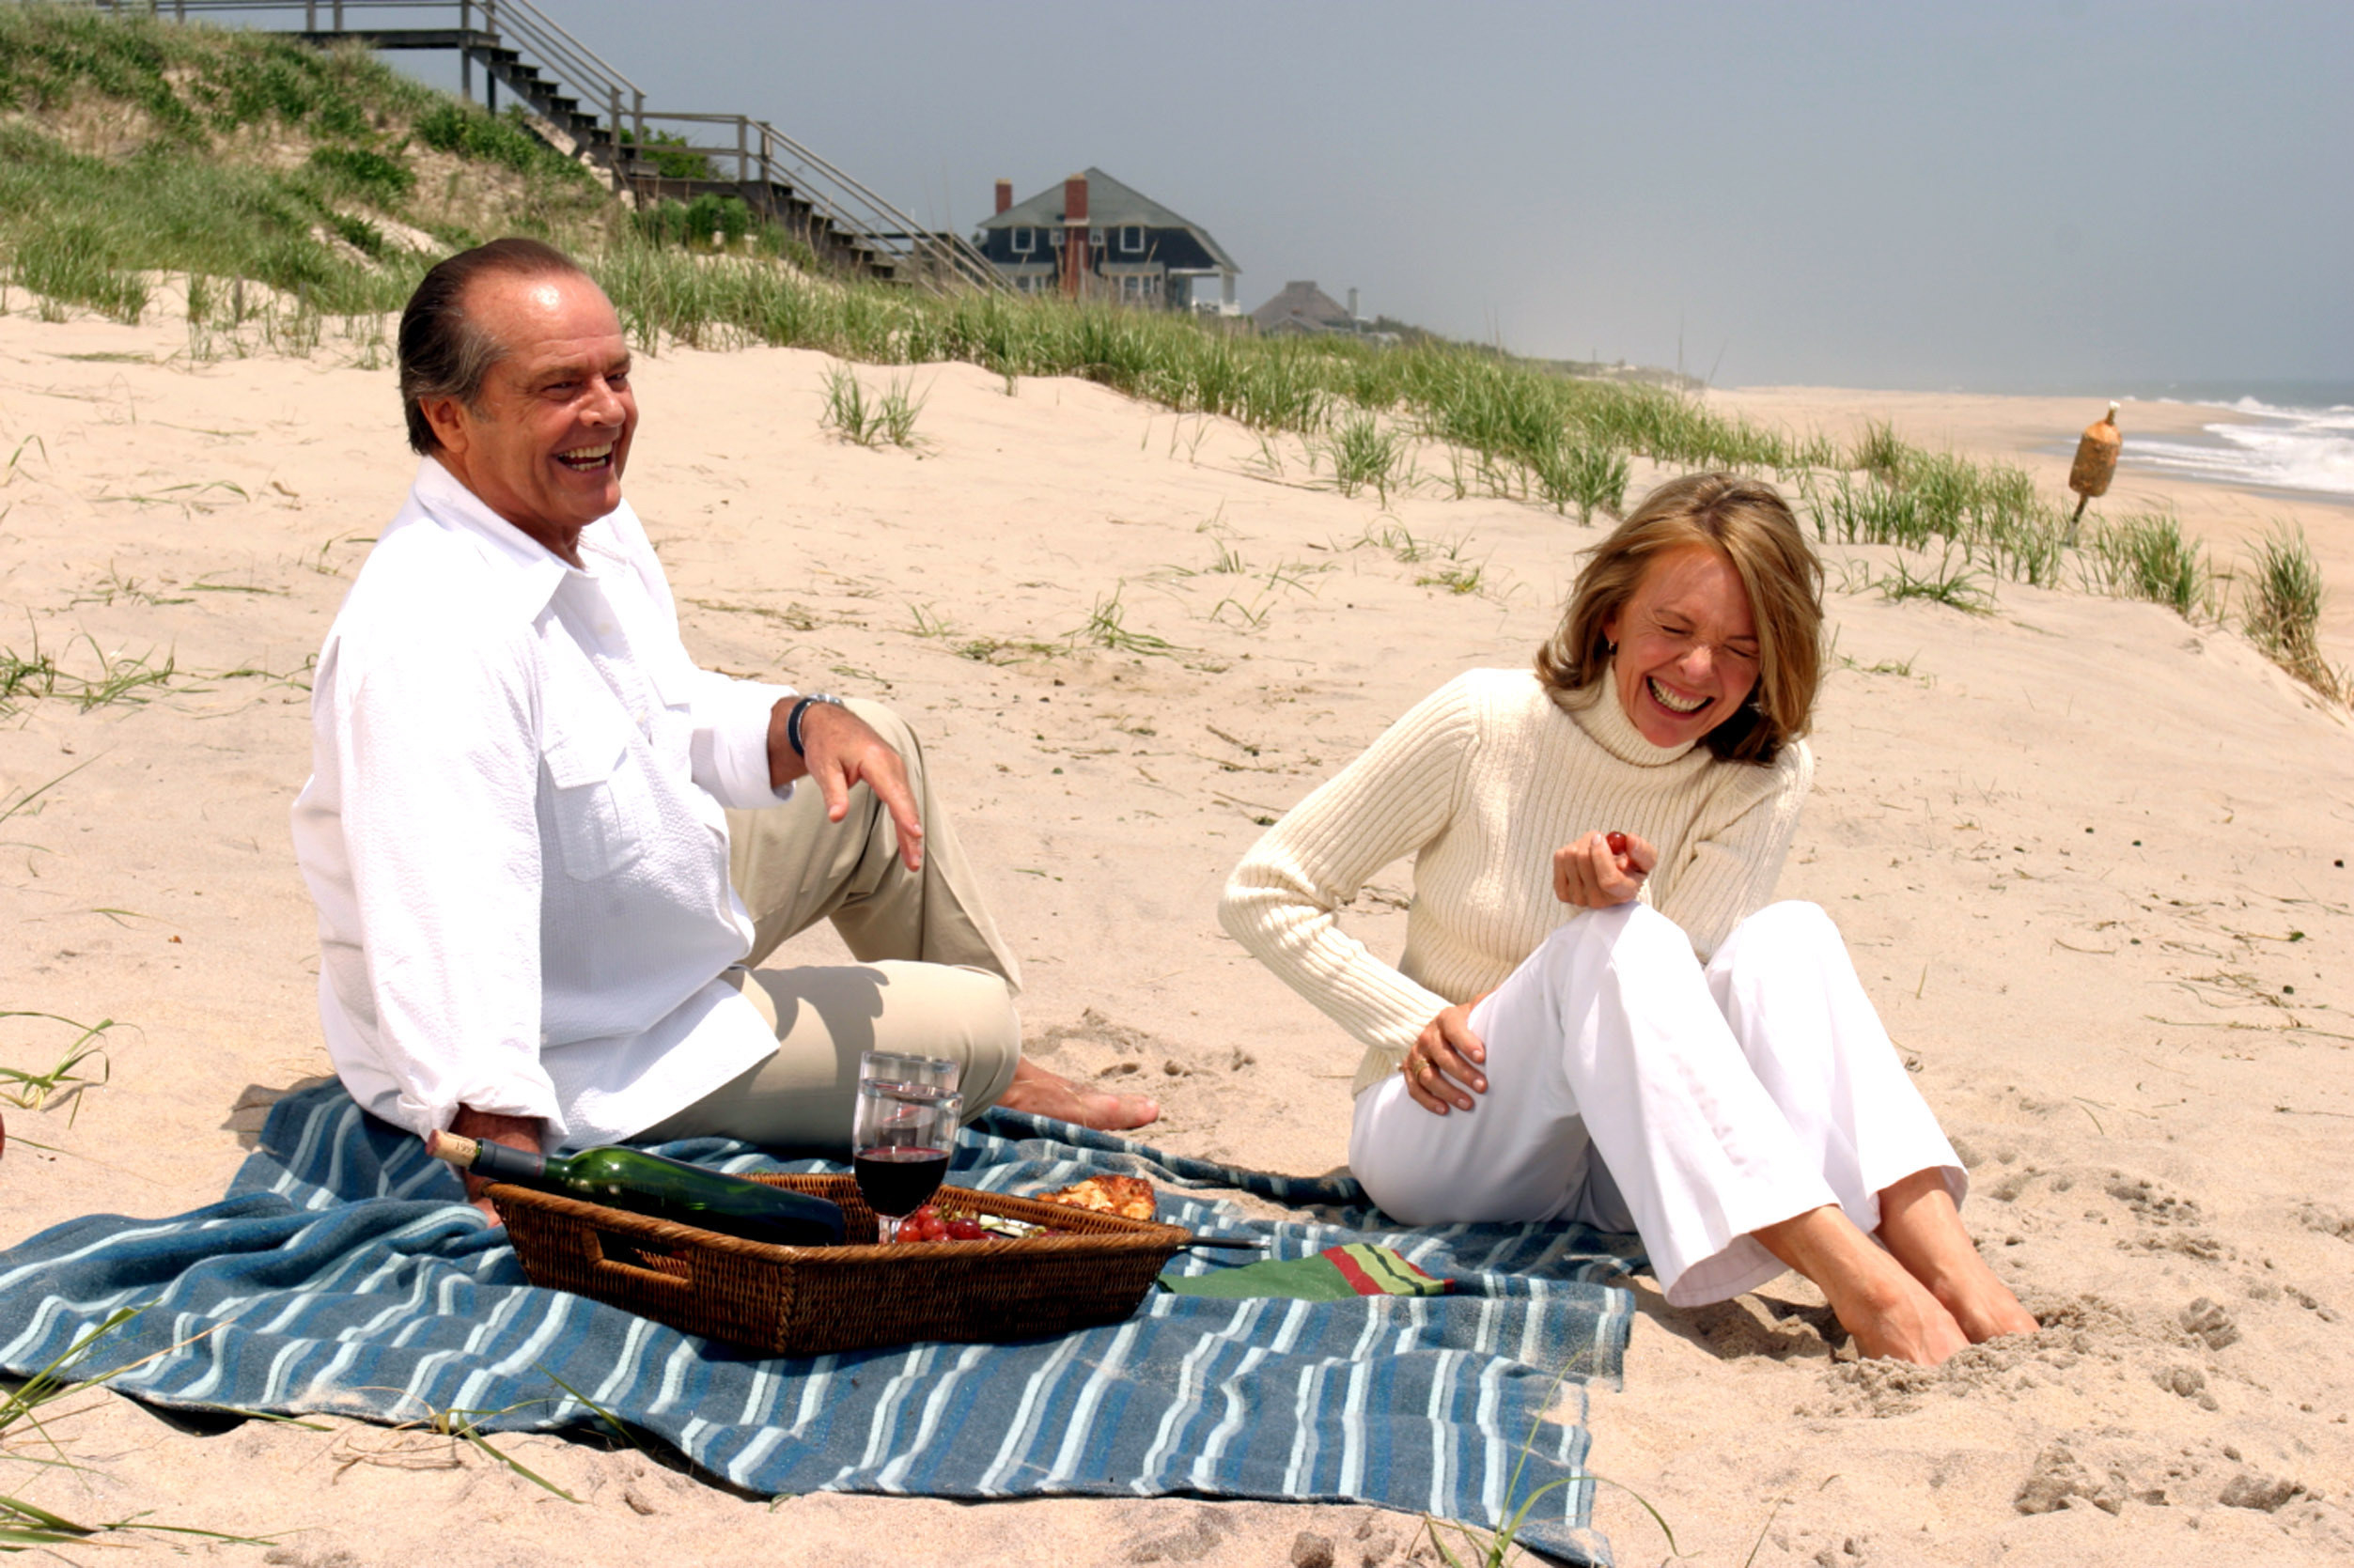 An older man and woman sit on the beach laughing